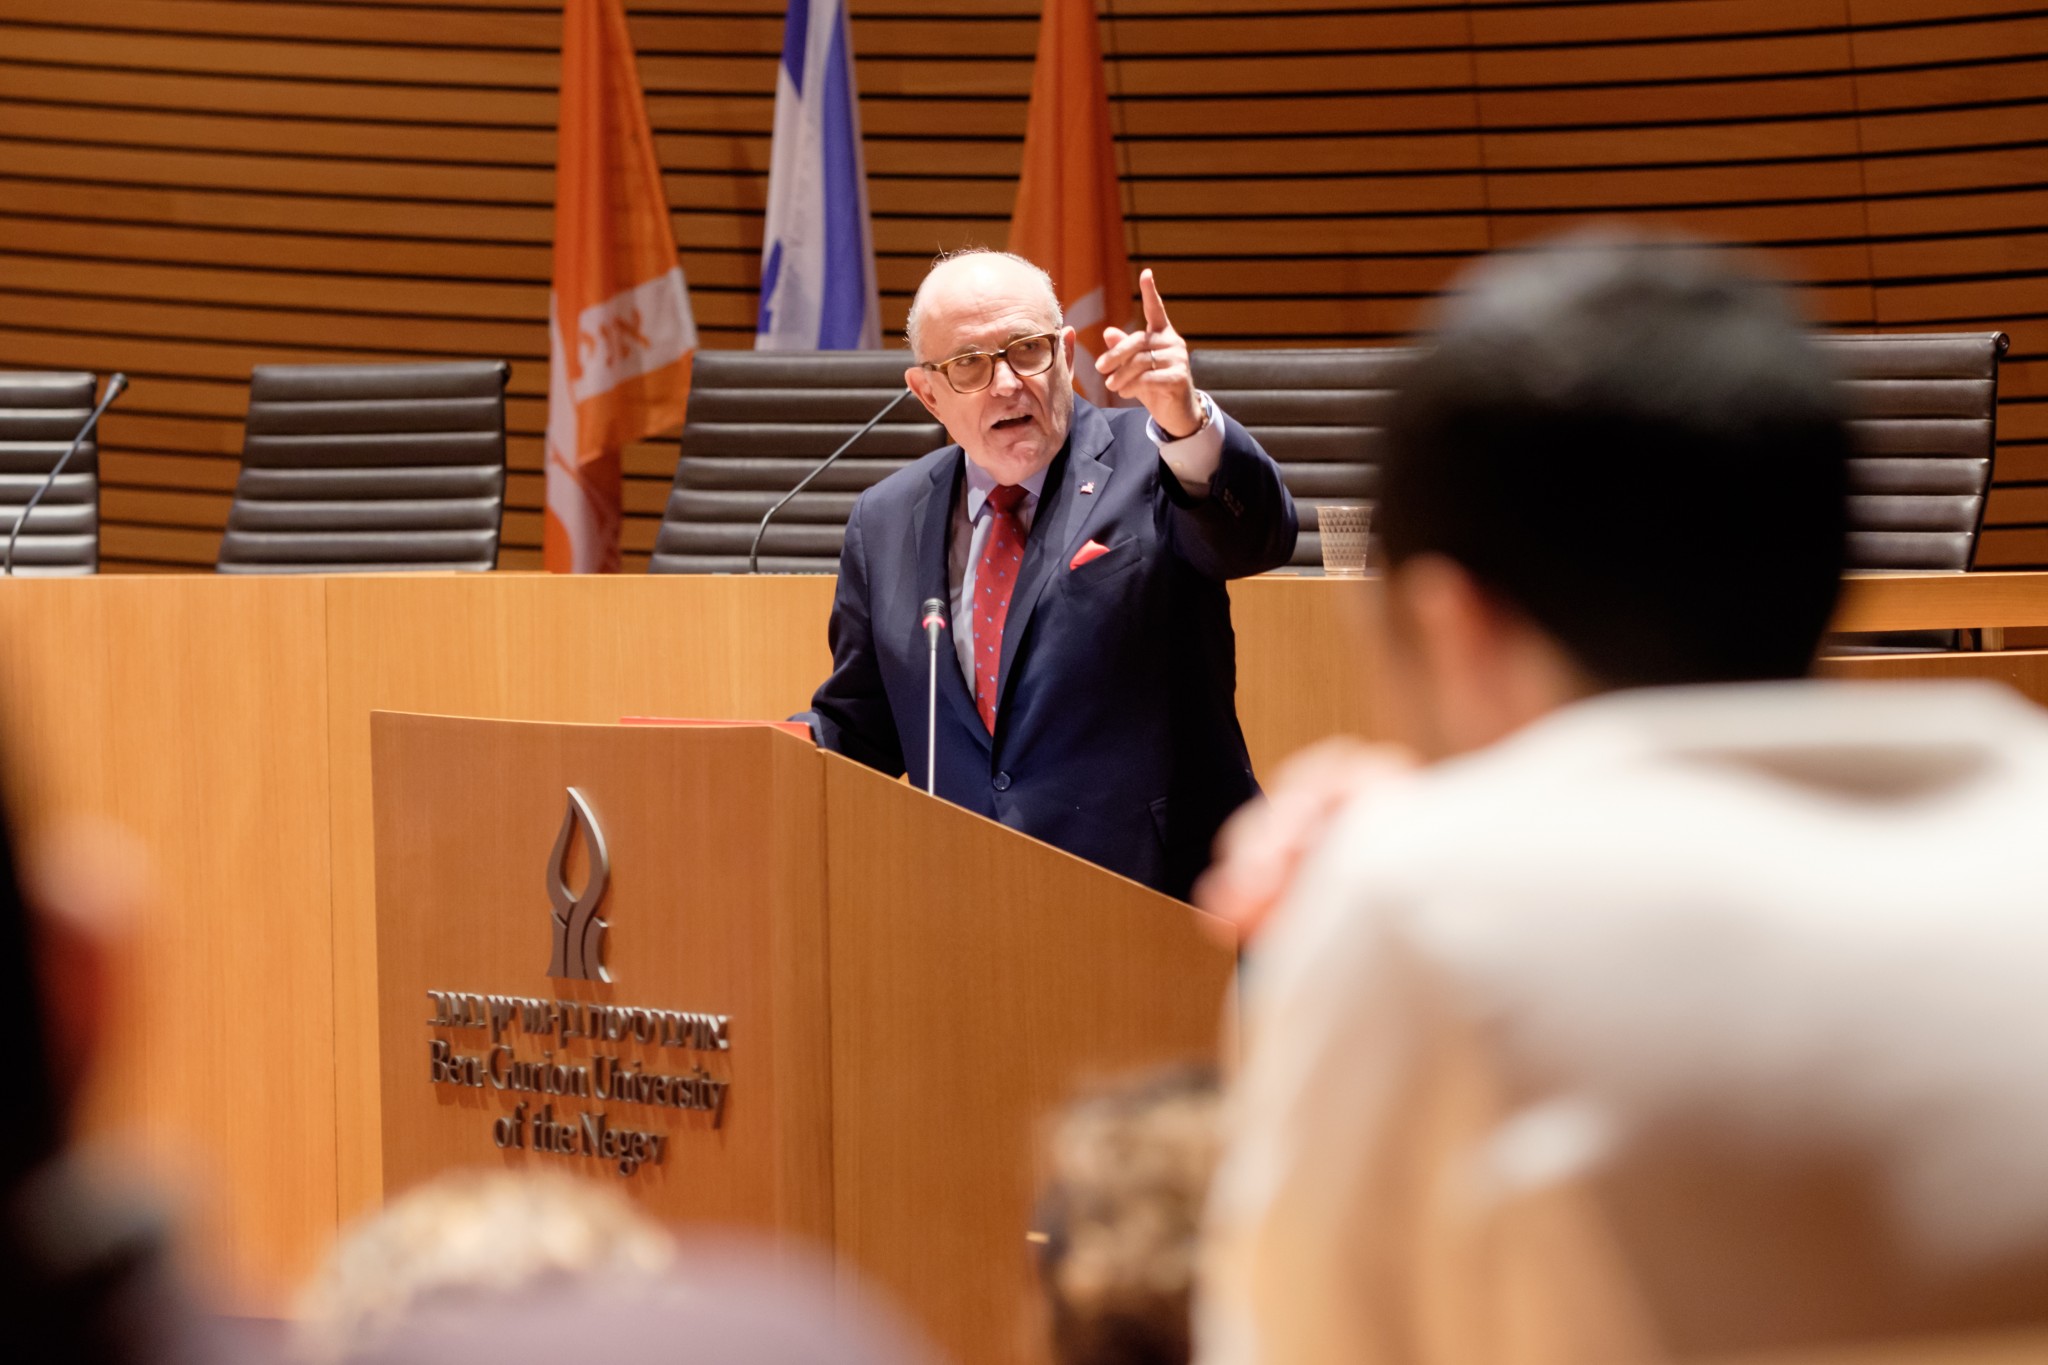 Former New York City Mayor Rudolph Giuliani delivers an address to students at Ben-Gurion University of the Negev in Beersheva on March 15, 2016. Photo by Dani Machlis/BGU